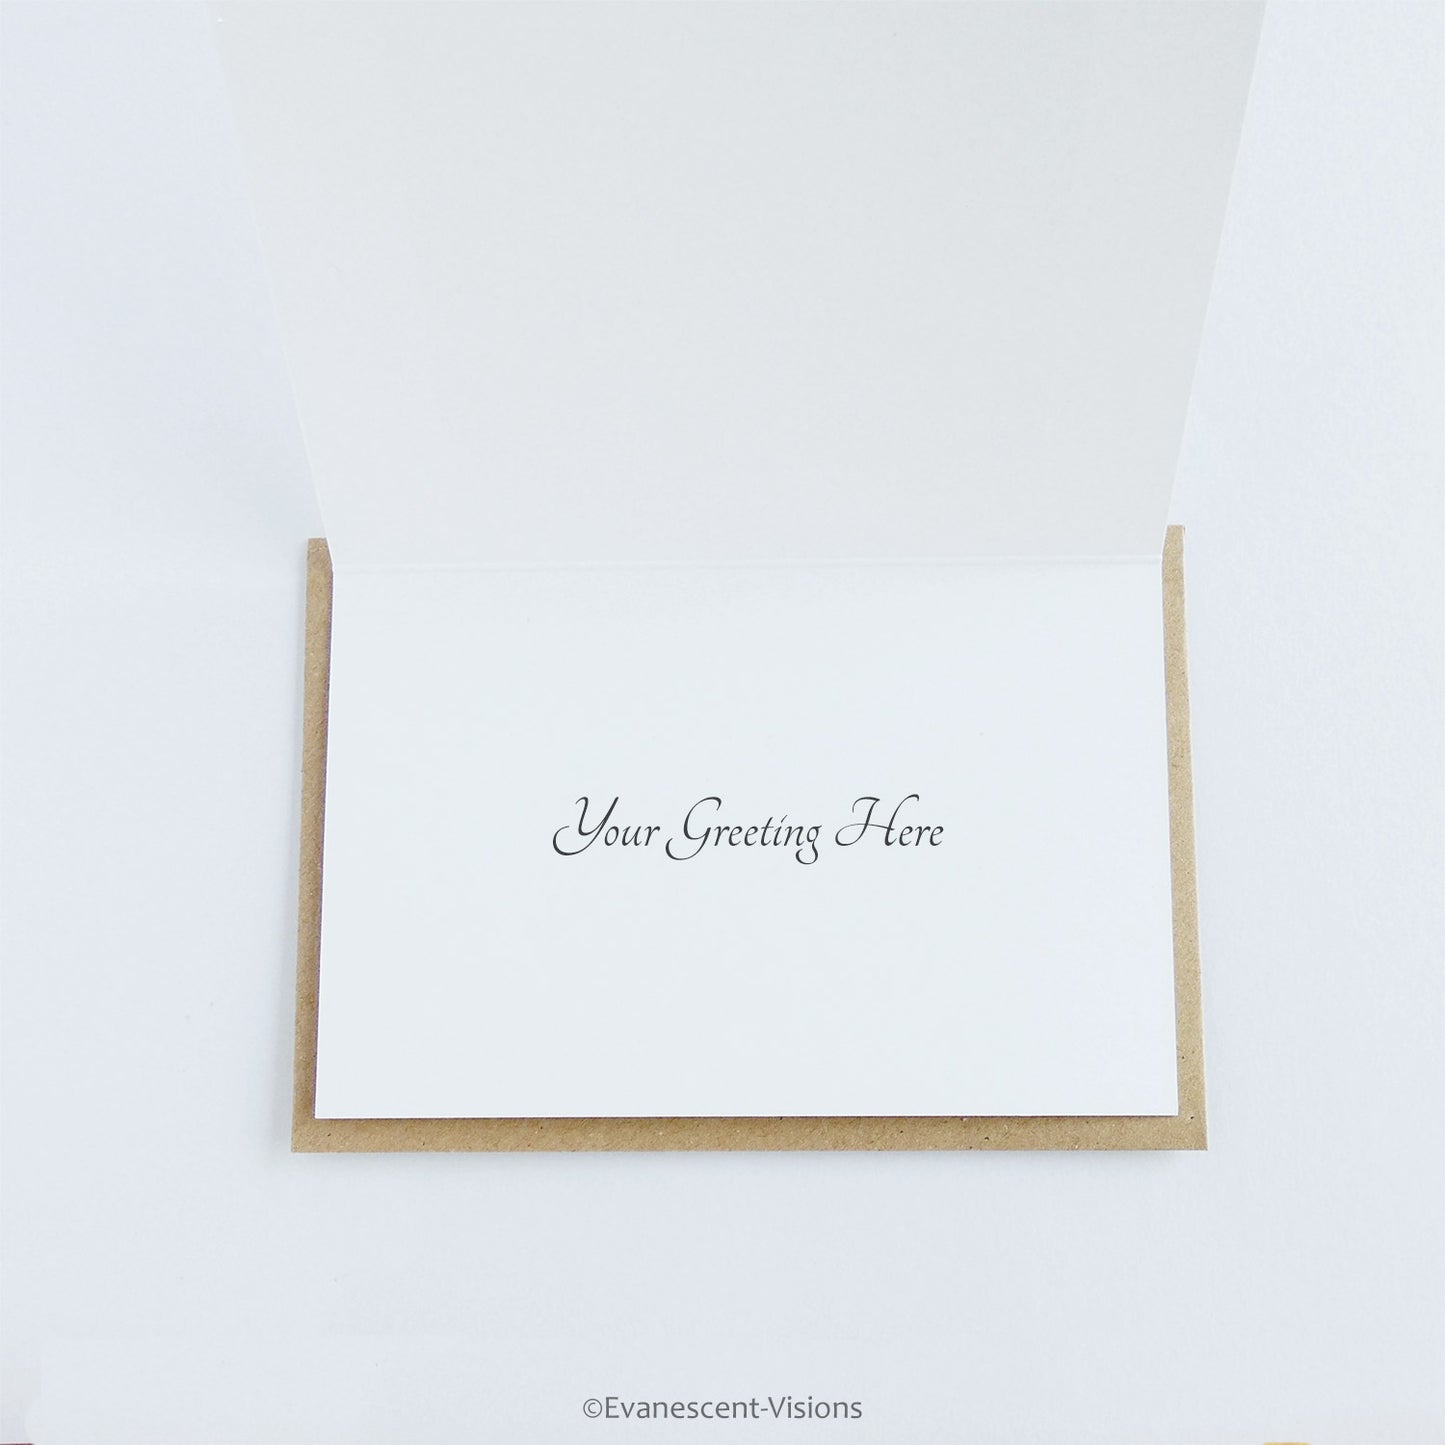 inside example of a printed greeting